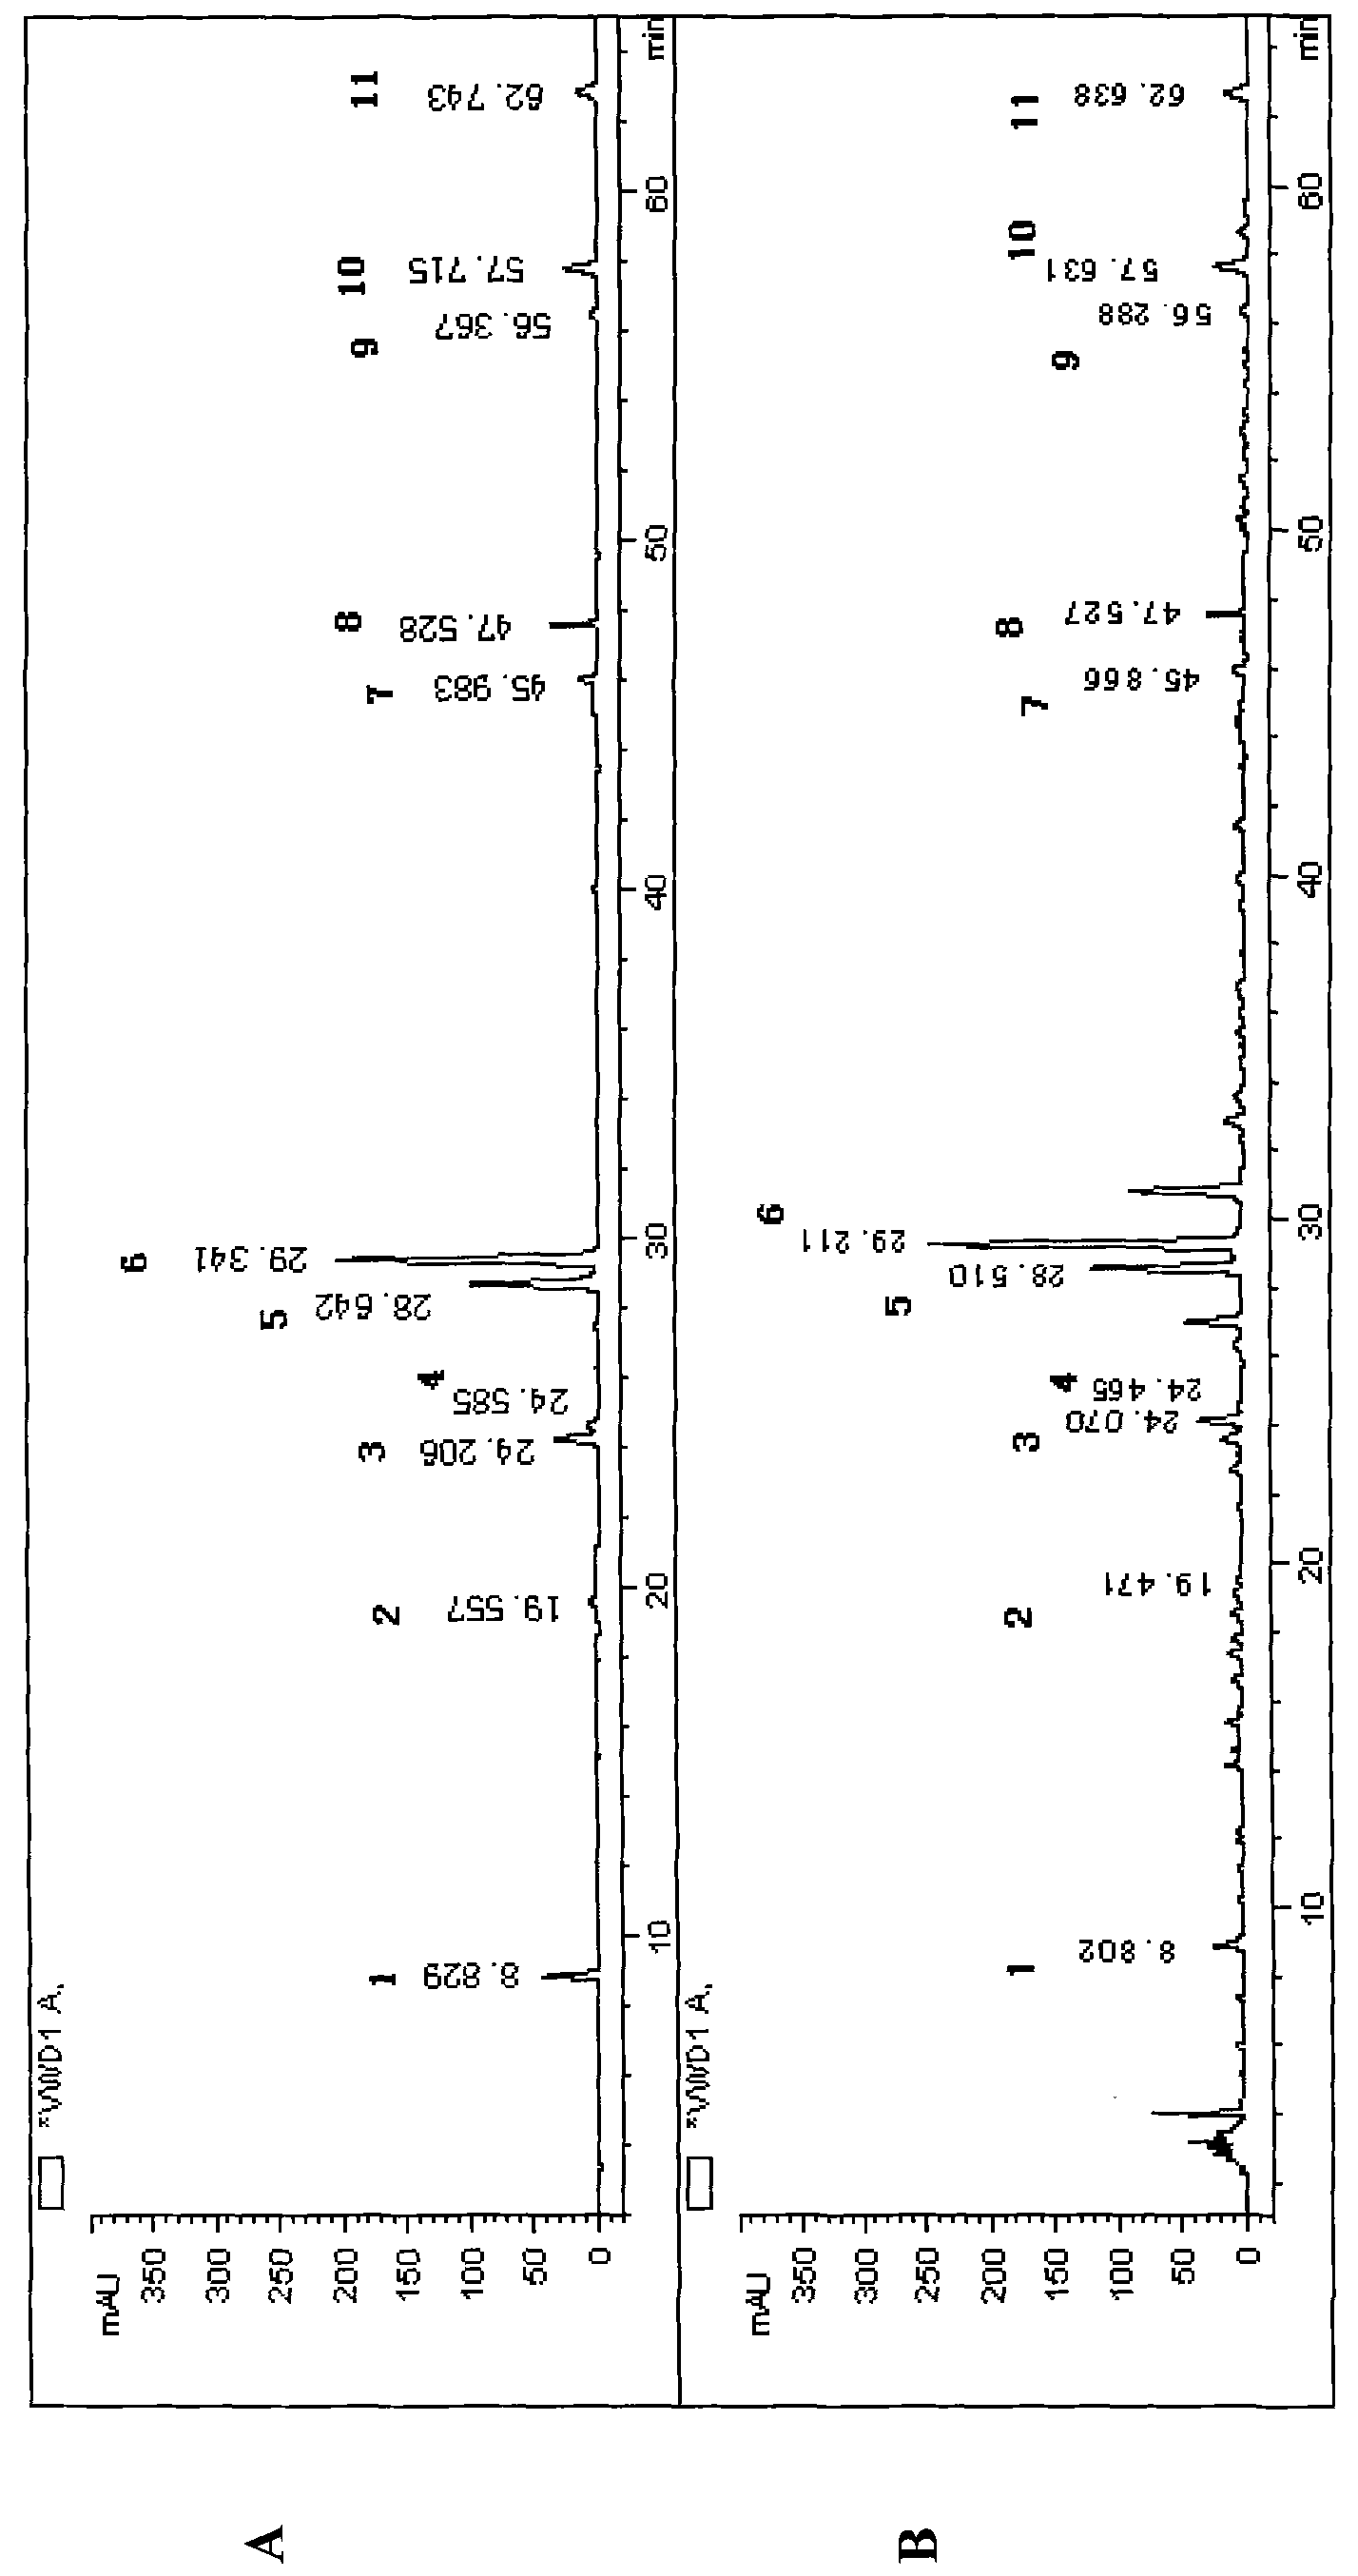 Method for measuring content of superfine powder preparation in five retentions powder